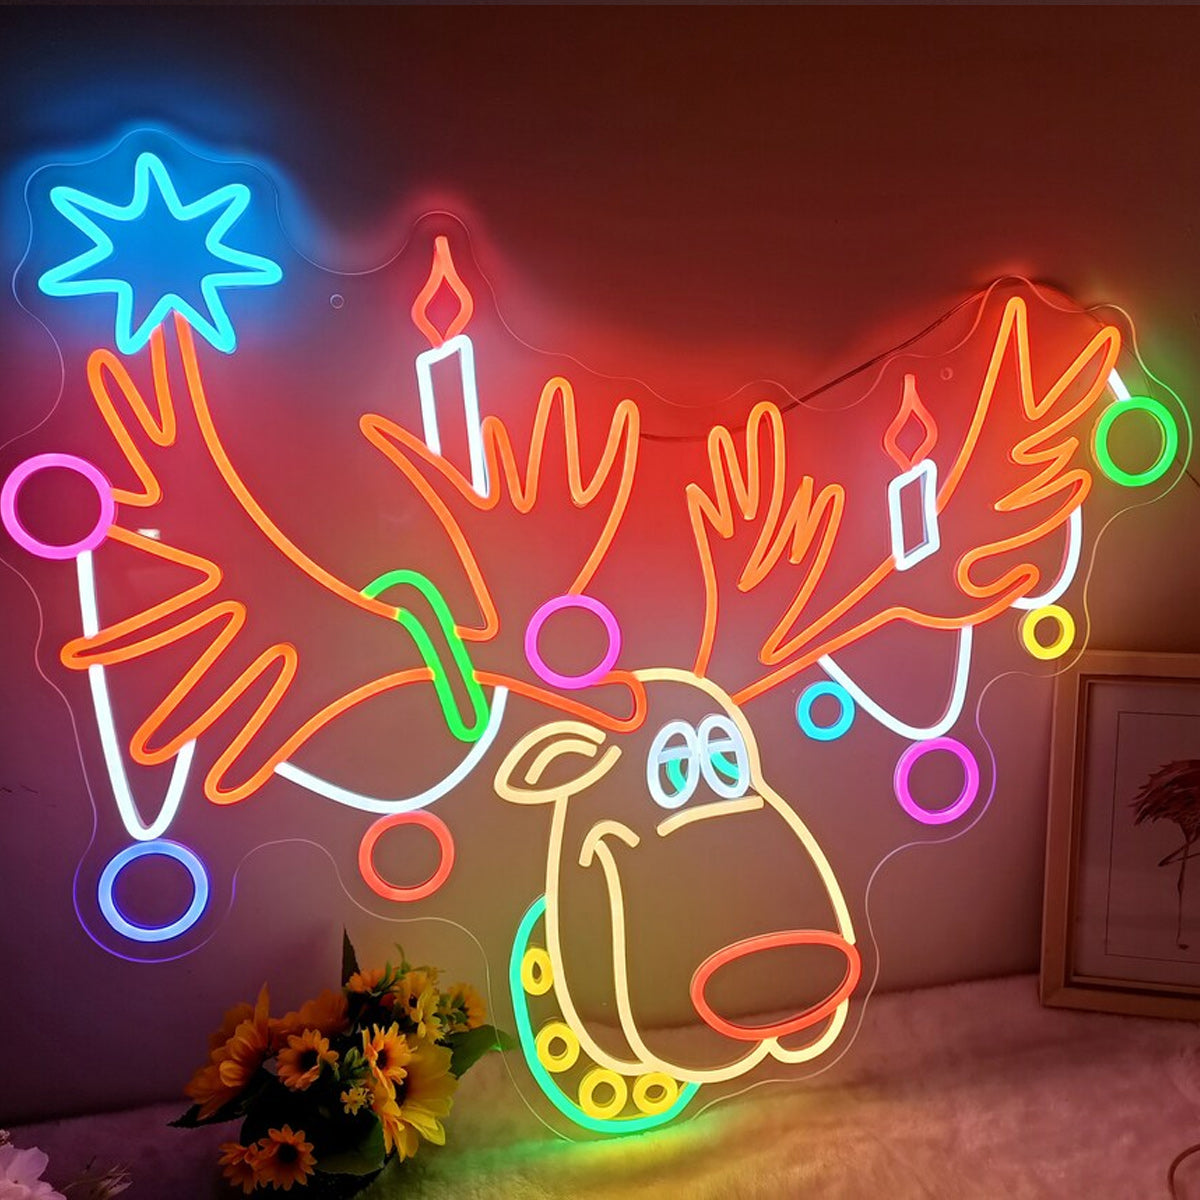 NEONIP-100% Handmade Christmas Rudolph the Red-Nosed Reindeer Neon Sign